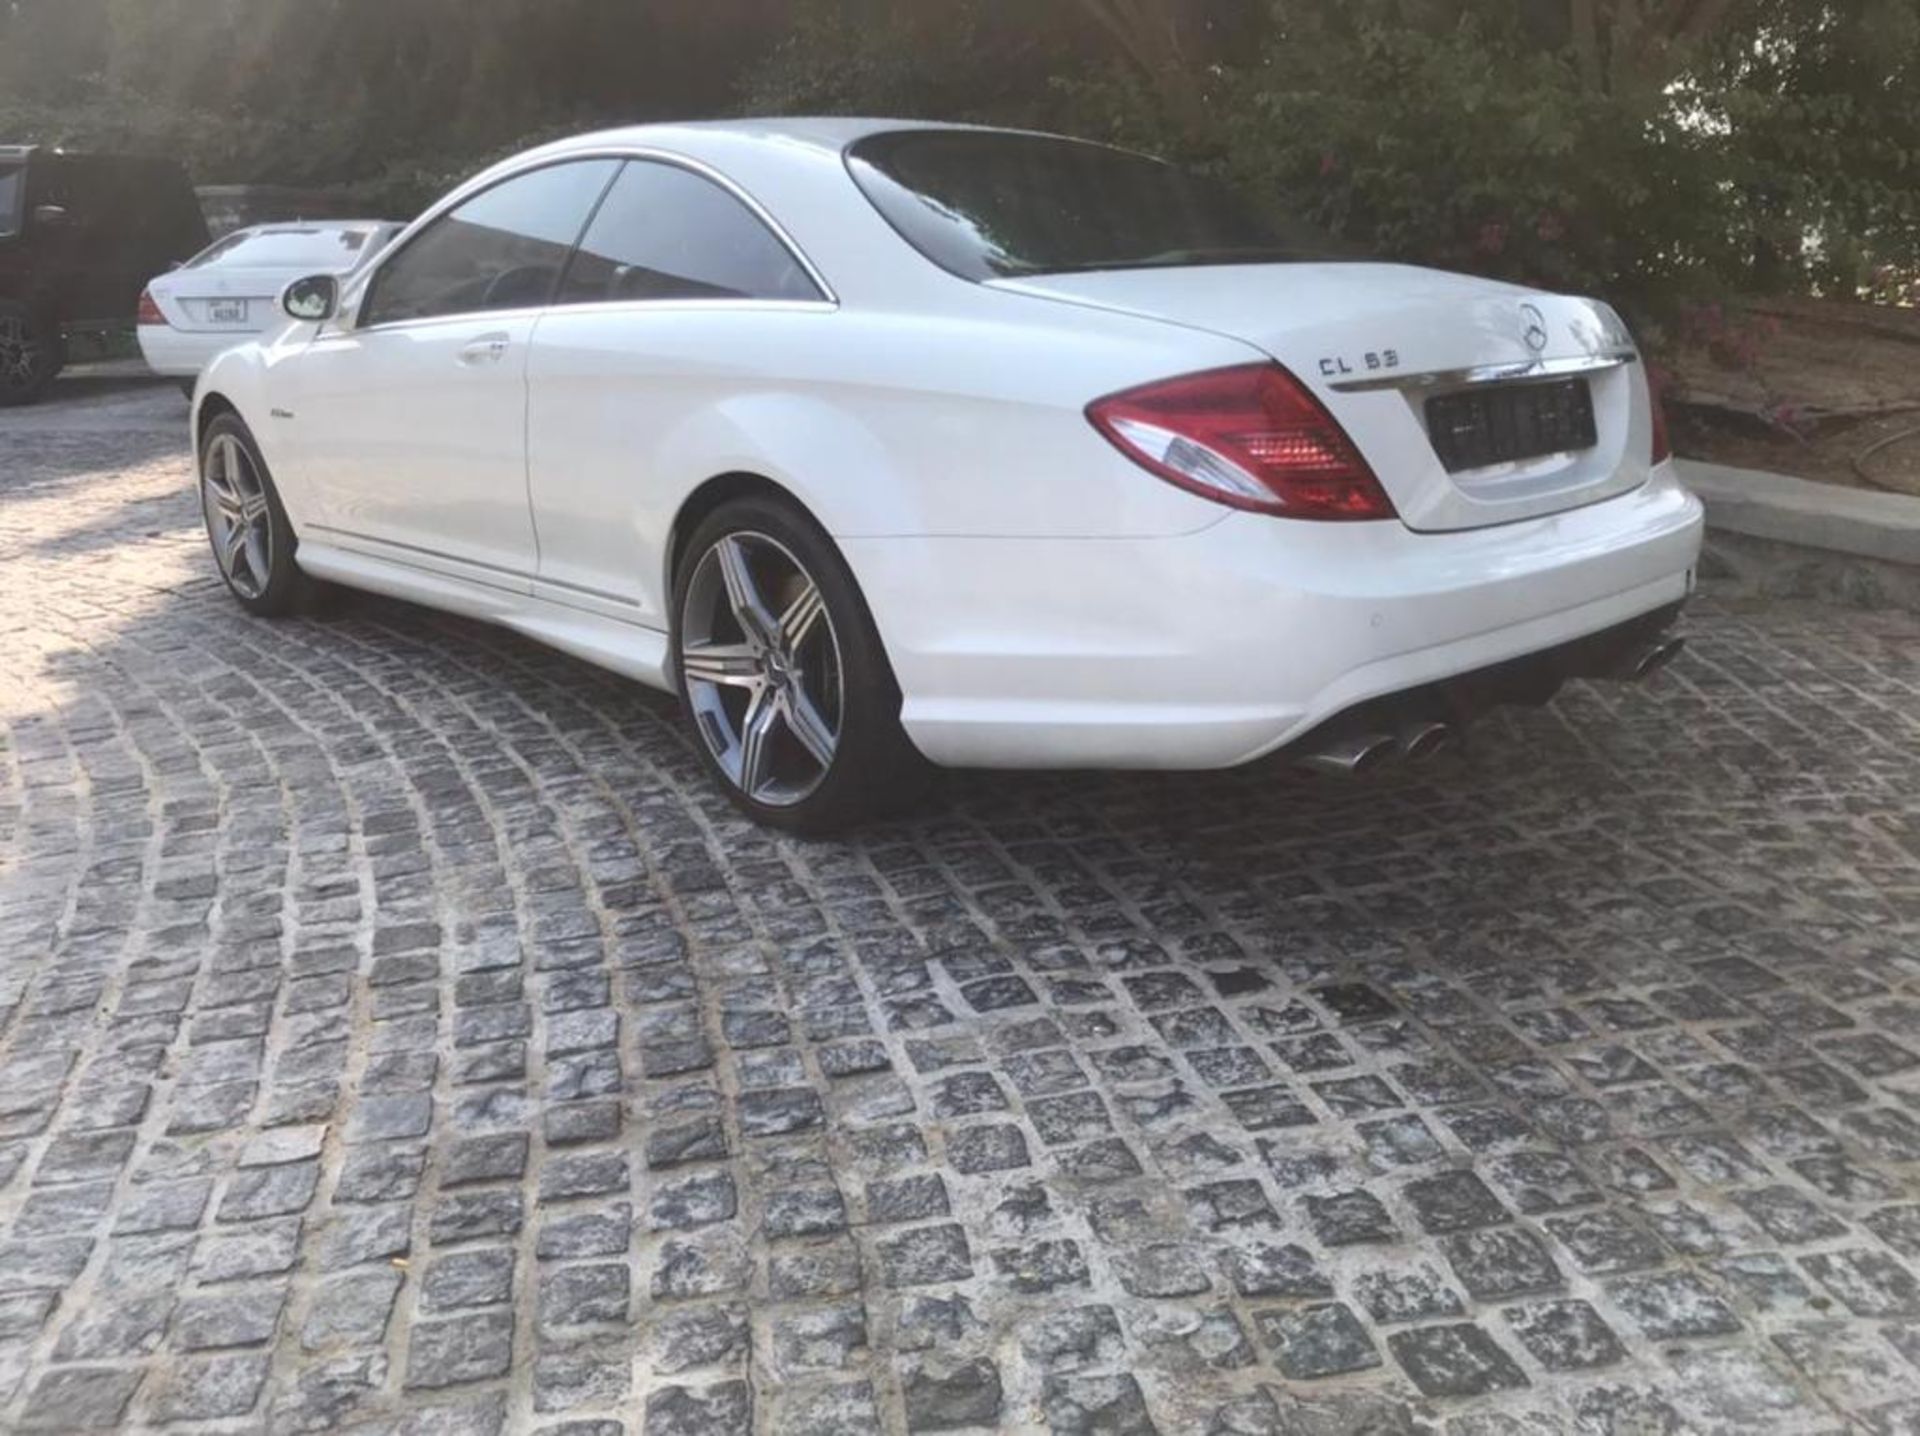 2008 Mercedes CL63 92,000km can export vat free available mid April - Image 12 of 12